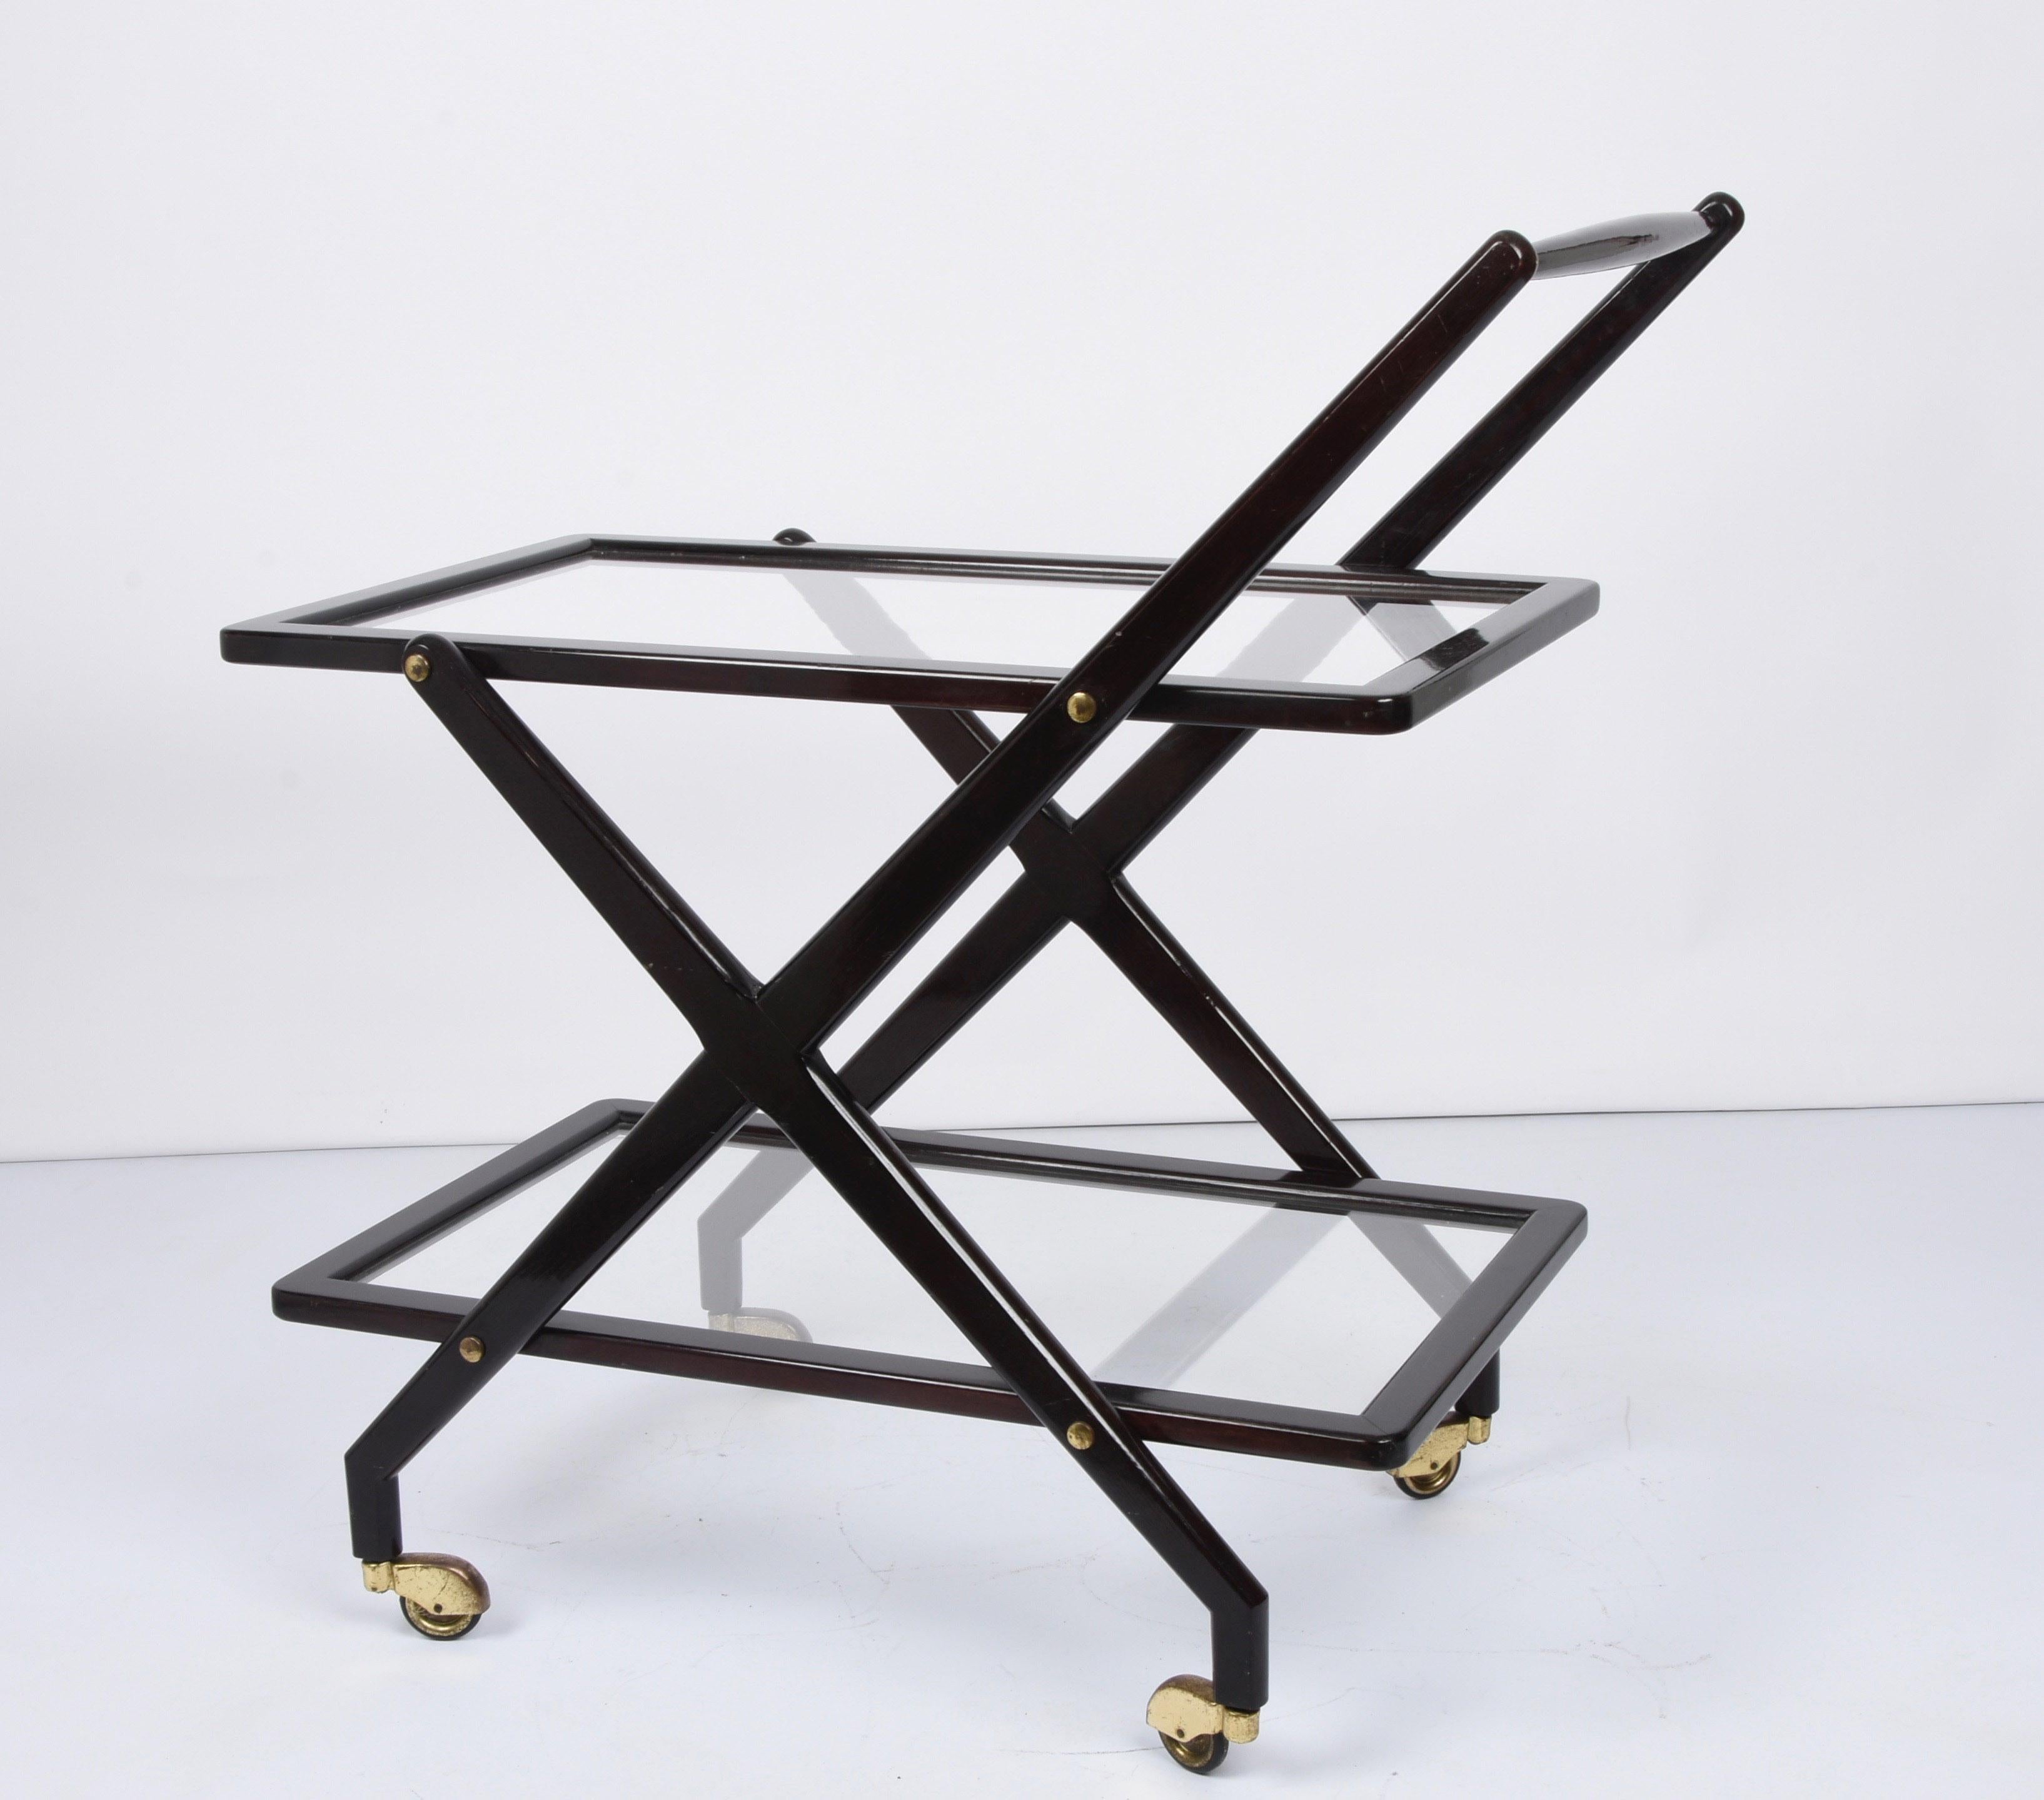 Amazing midcentury Italian serving bar cart in walnut wood, with brass finishes. This cart was designed in Italy by Cesare Lacca during the 1950s.

This wonderful piece has two shelves, with a structure made of solid walnut with its original